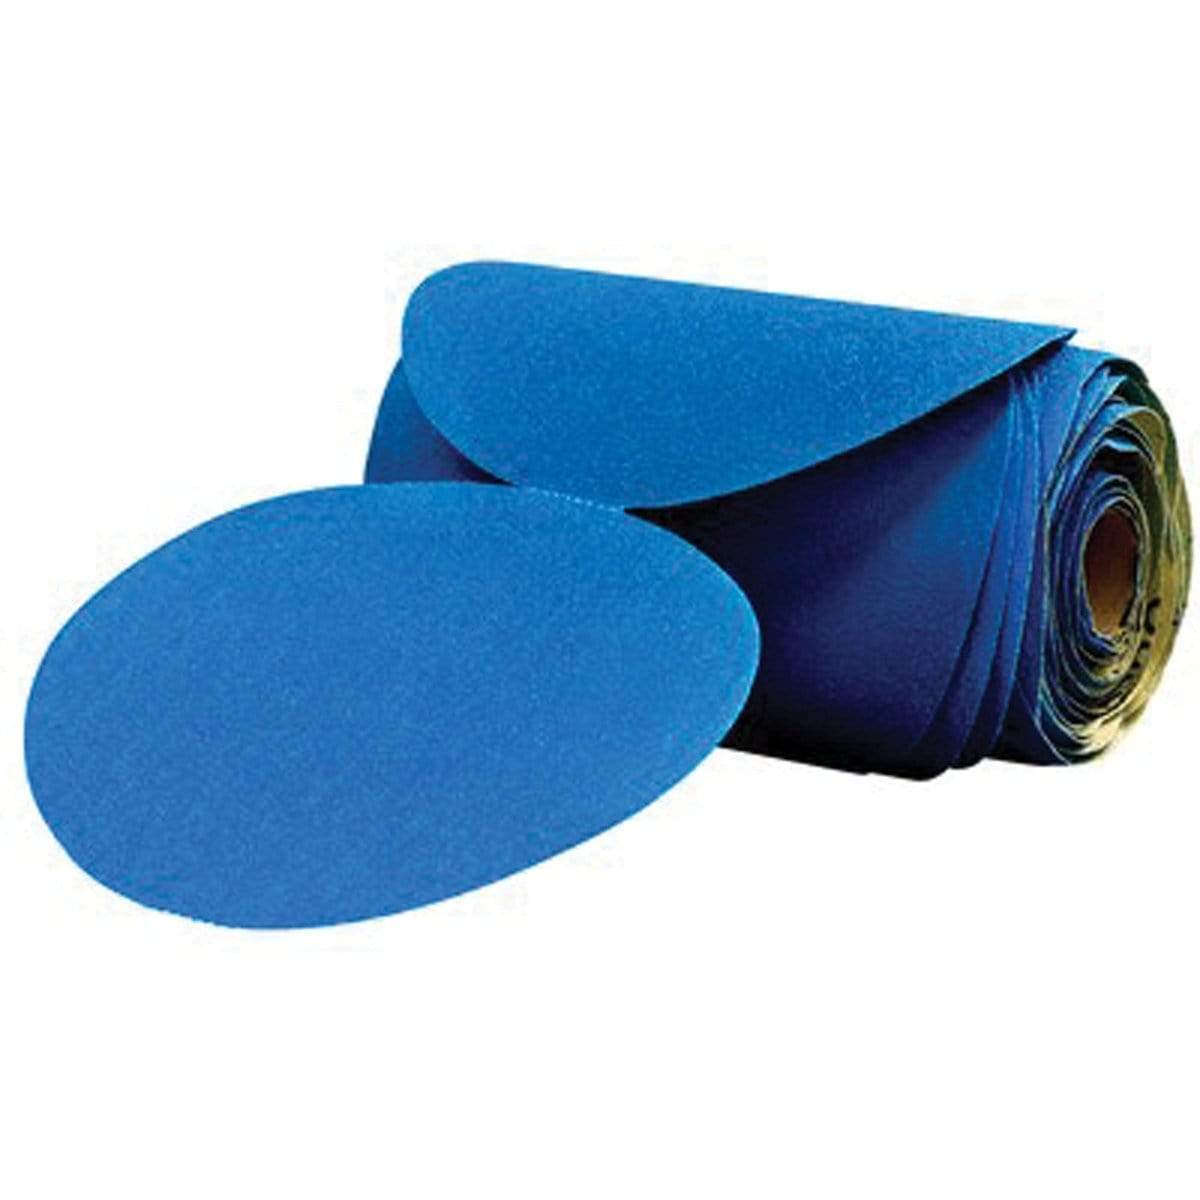 3M Marine Qualifies for Free Shipping 3M Stikit Blue Sandpaper 6" Disc 120 100/Roll #36204